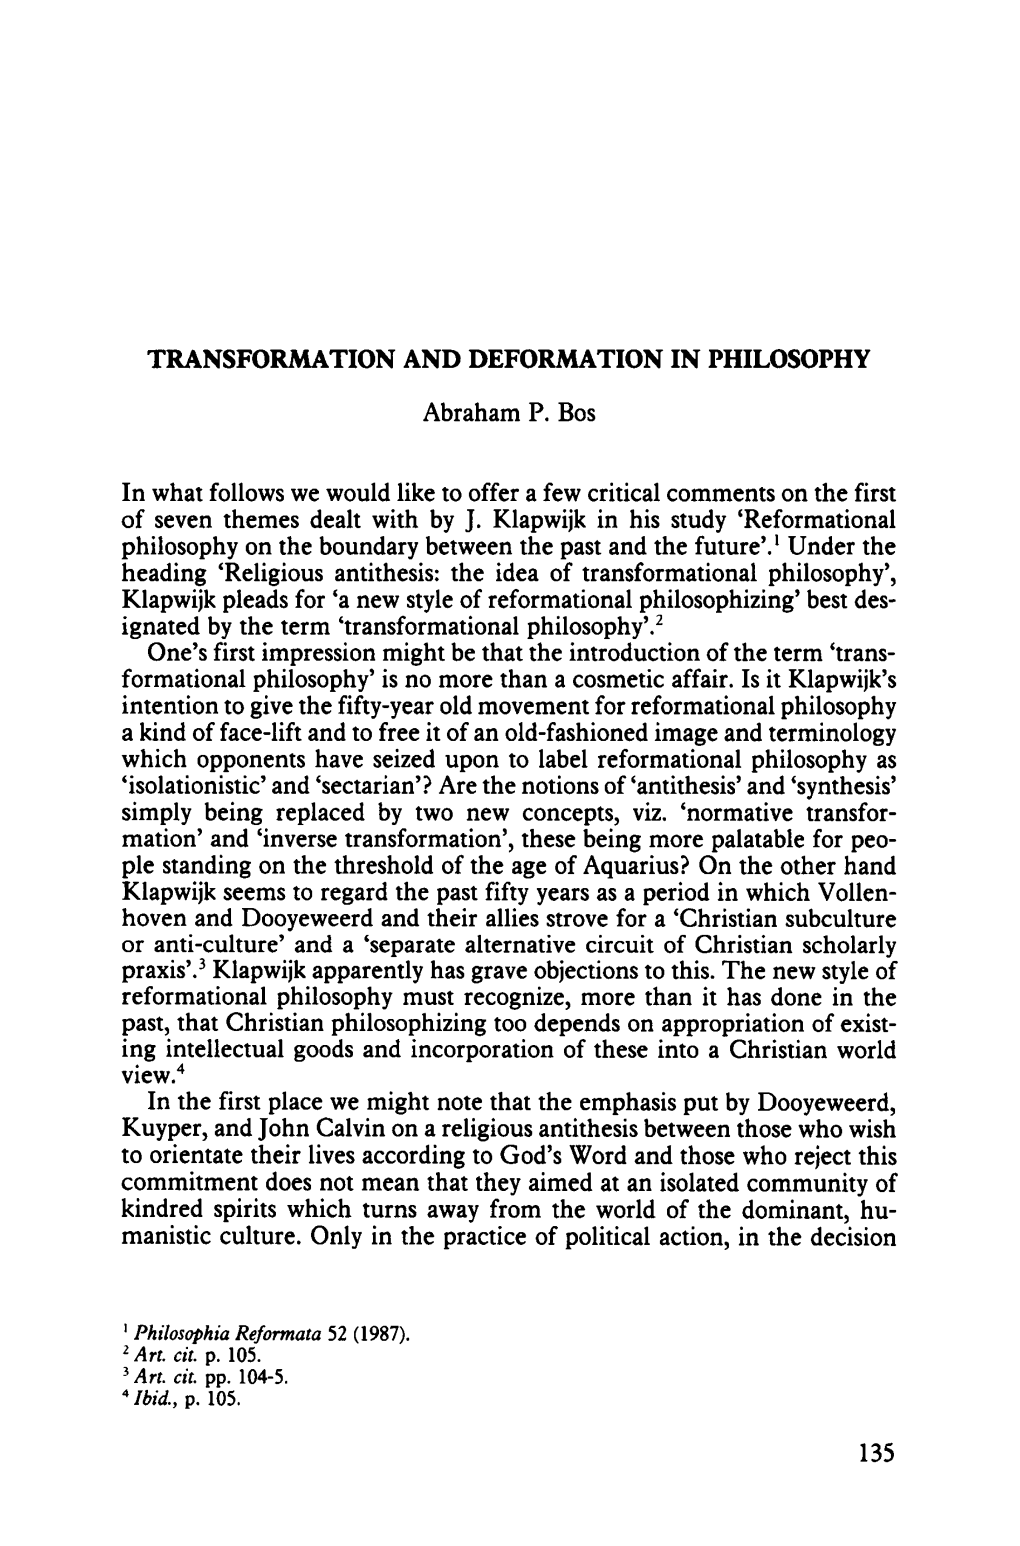 Transformation and Deformation in Philosophy